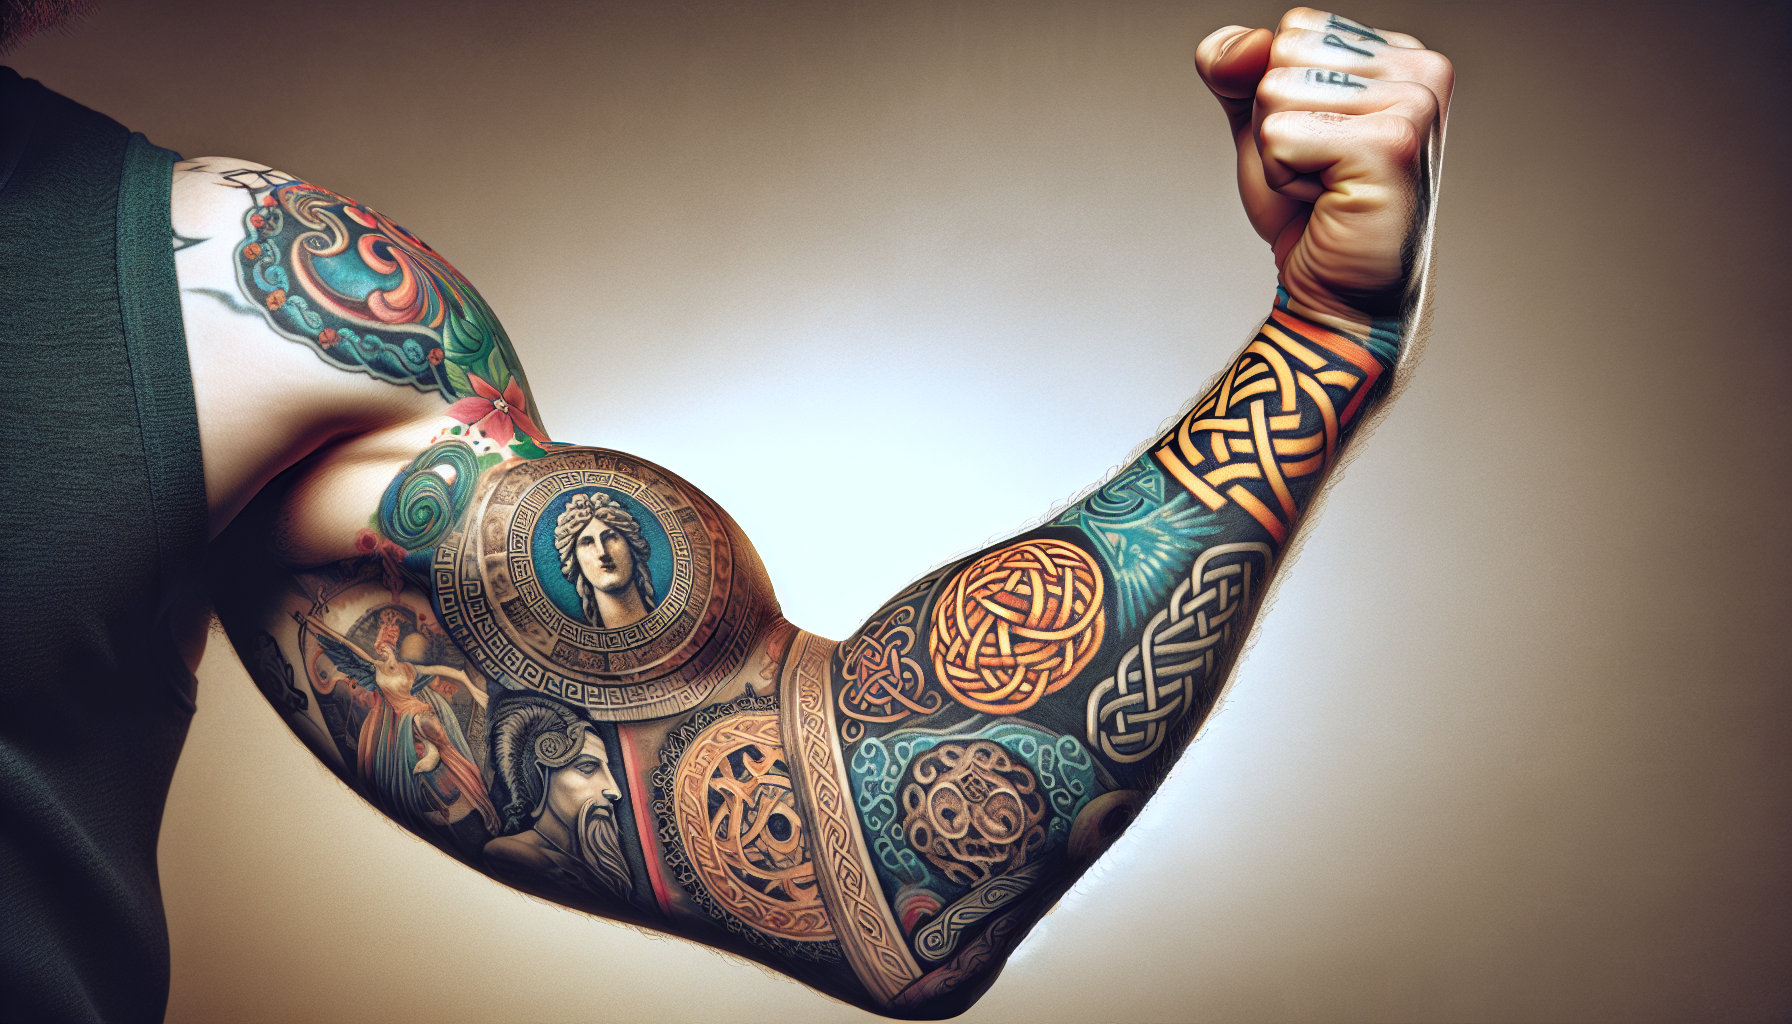 Tattoos with deeper meanings including ancient Greek gods, feminist symbols, and Celtic knots